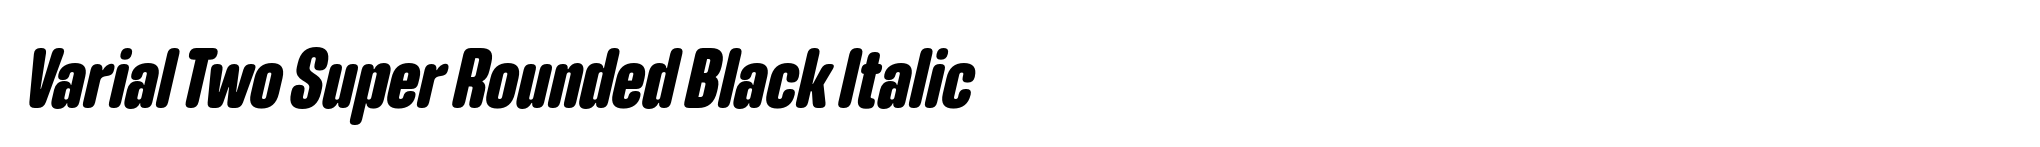 Varial Two Super Rounded Black Italic image